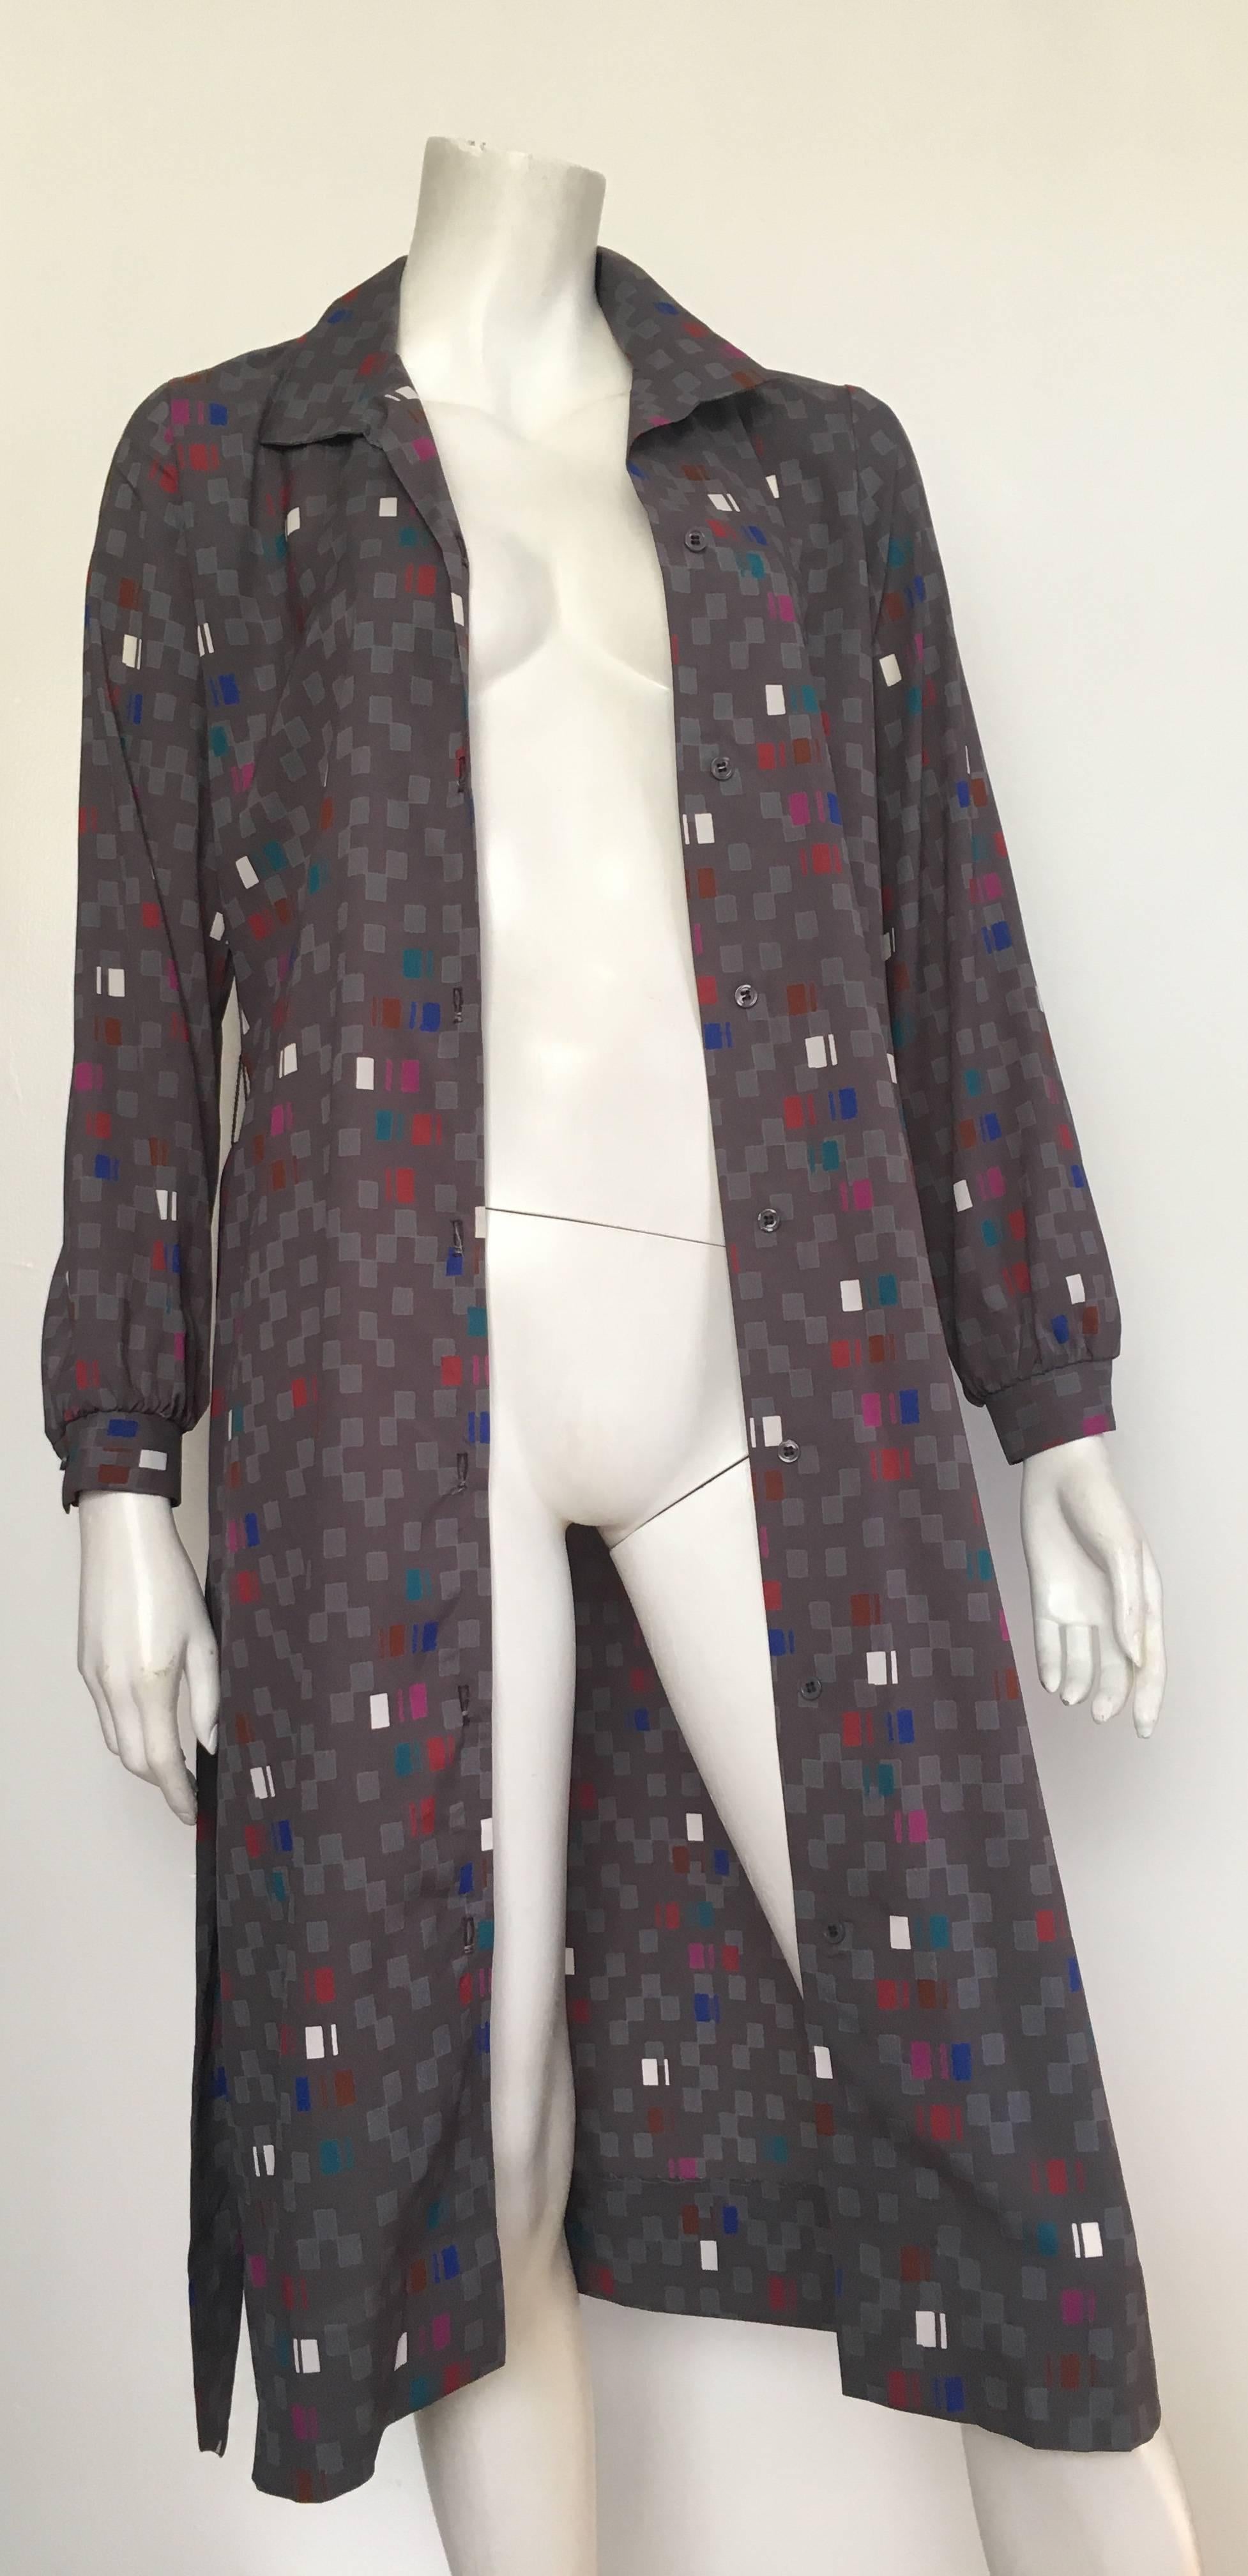 Pierre Balmain 1980s grey with abstract print button up long sleeve shirt dress with belt is a size 12 but fits like a modern USA size 8 / 10.  The waist is 35